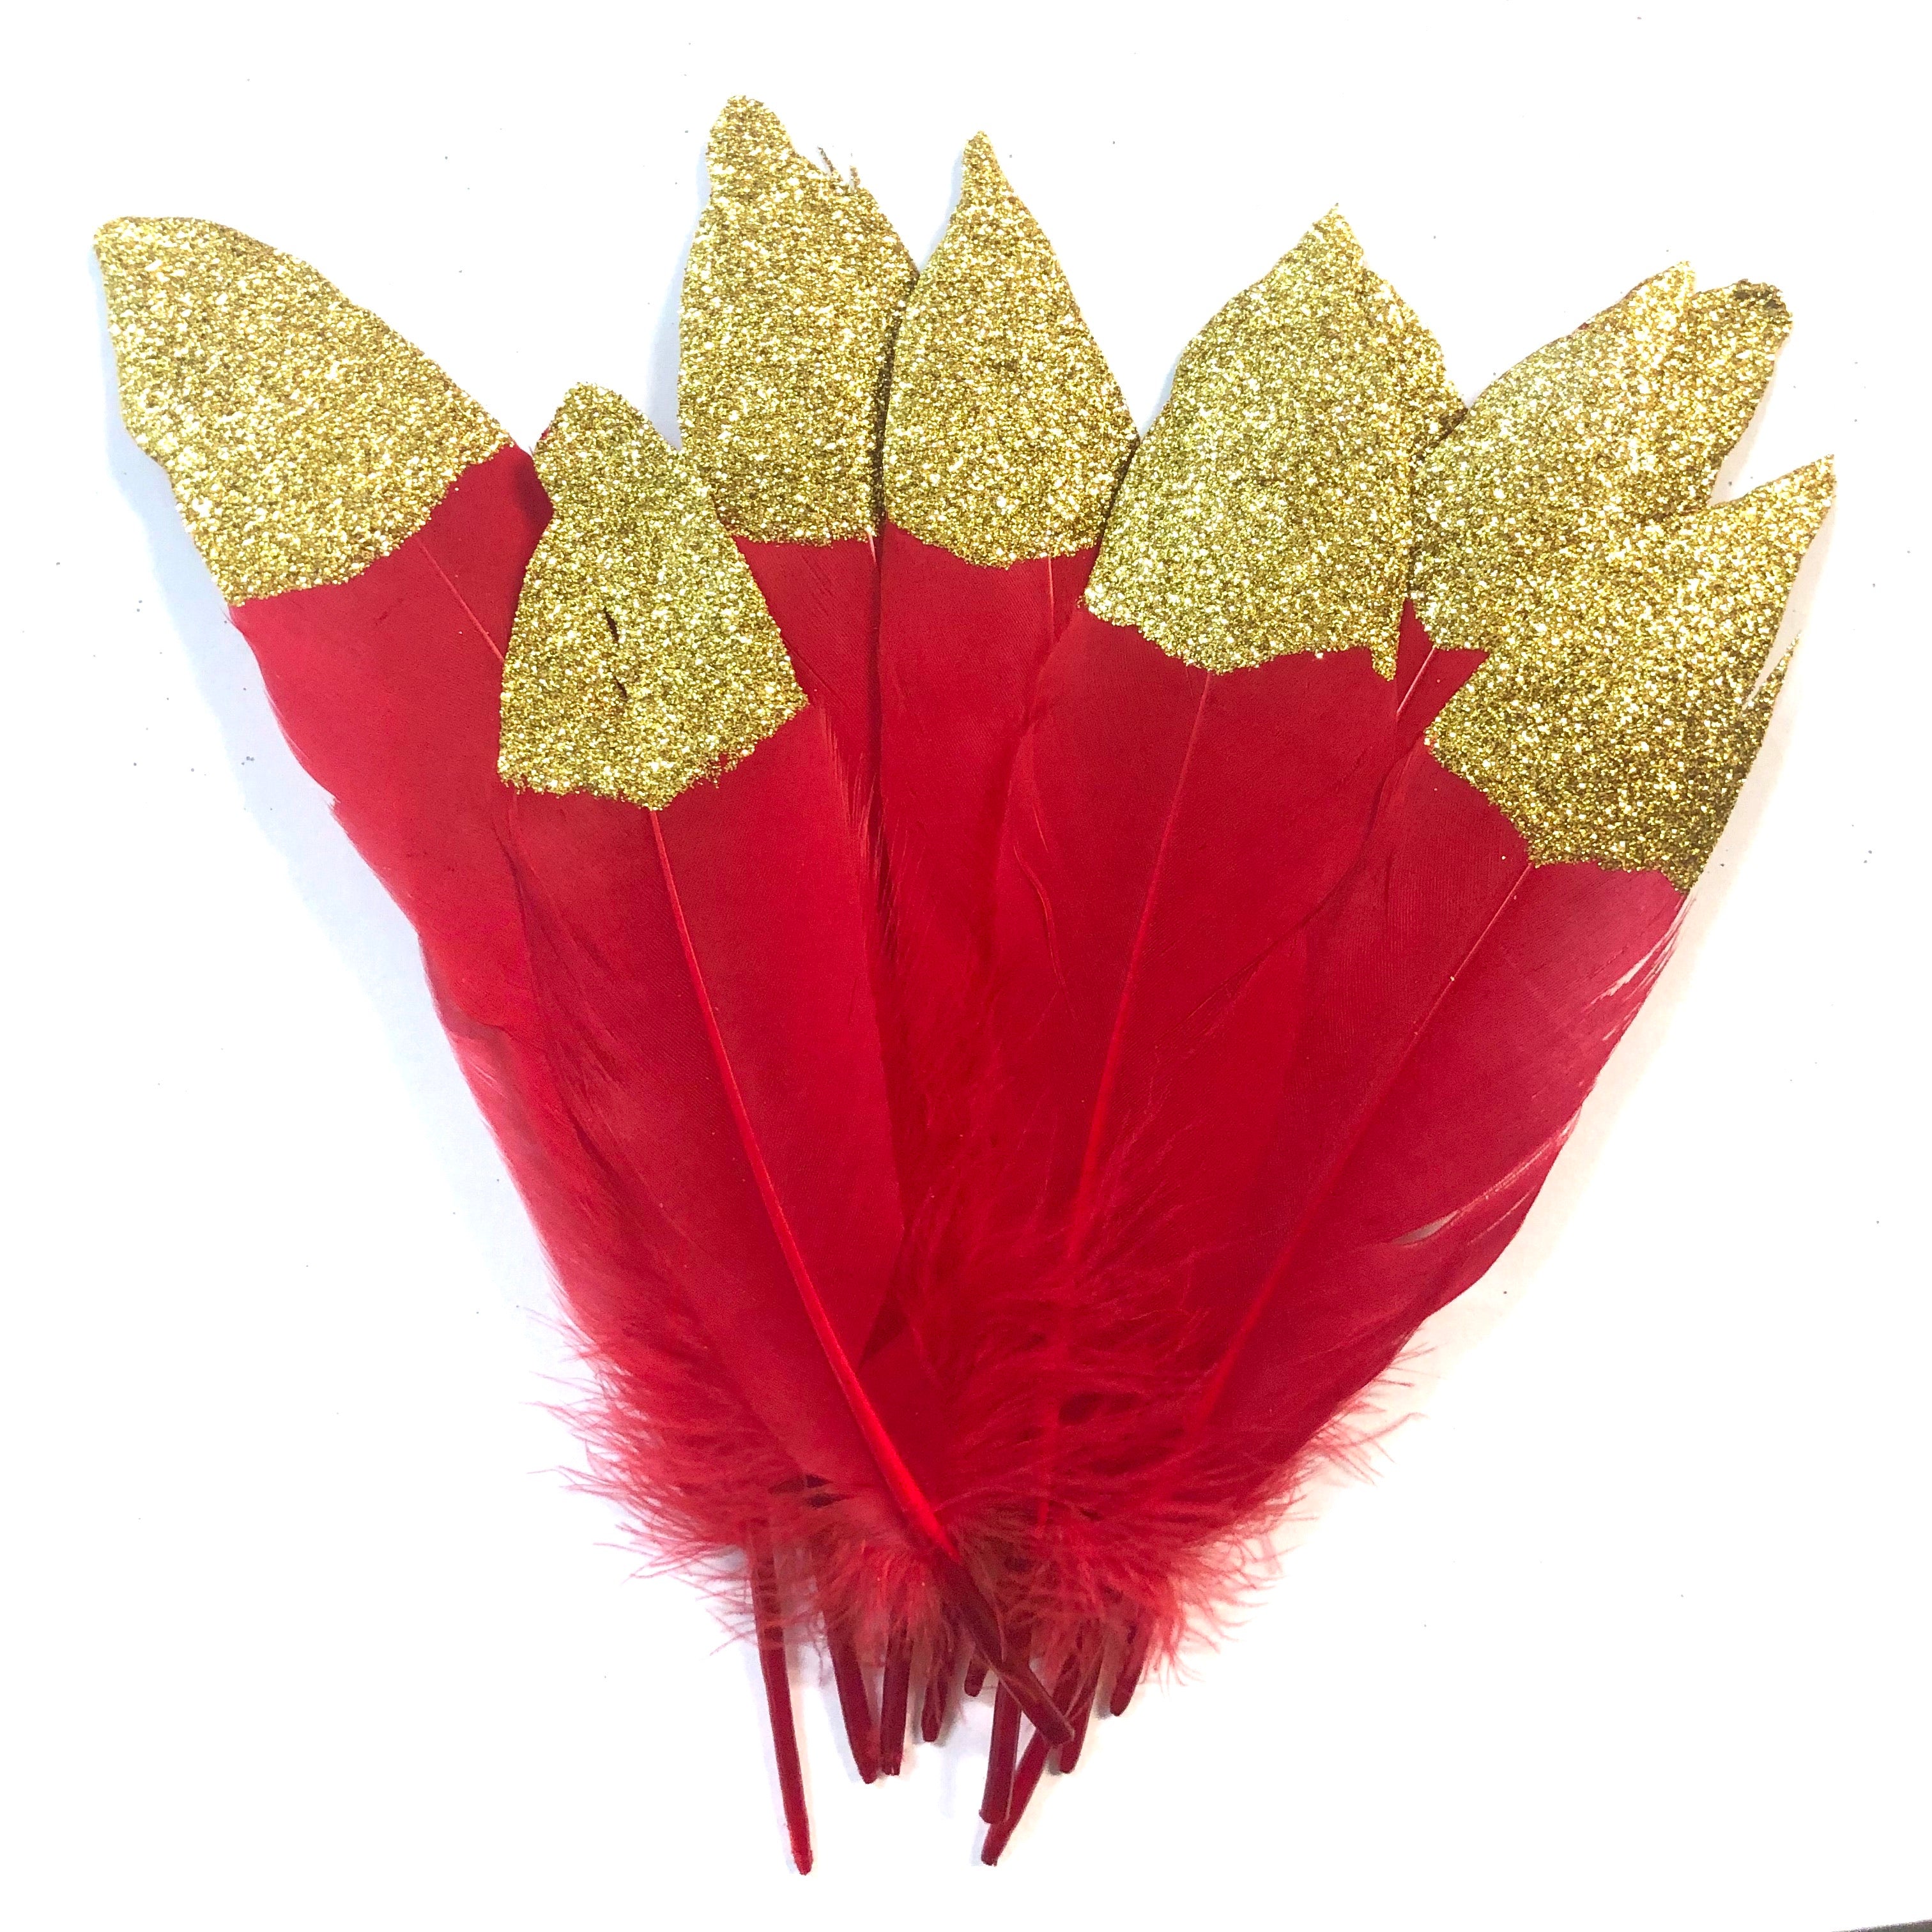 Goose Pointer Feather Gold Glitter Tipped x 10 pcs - Red